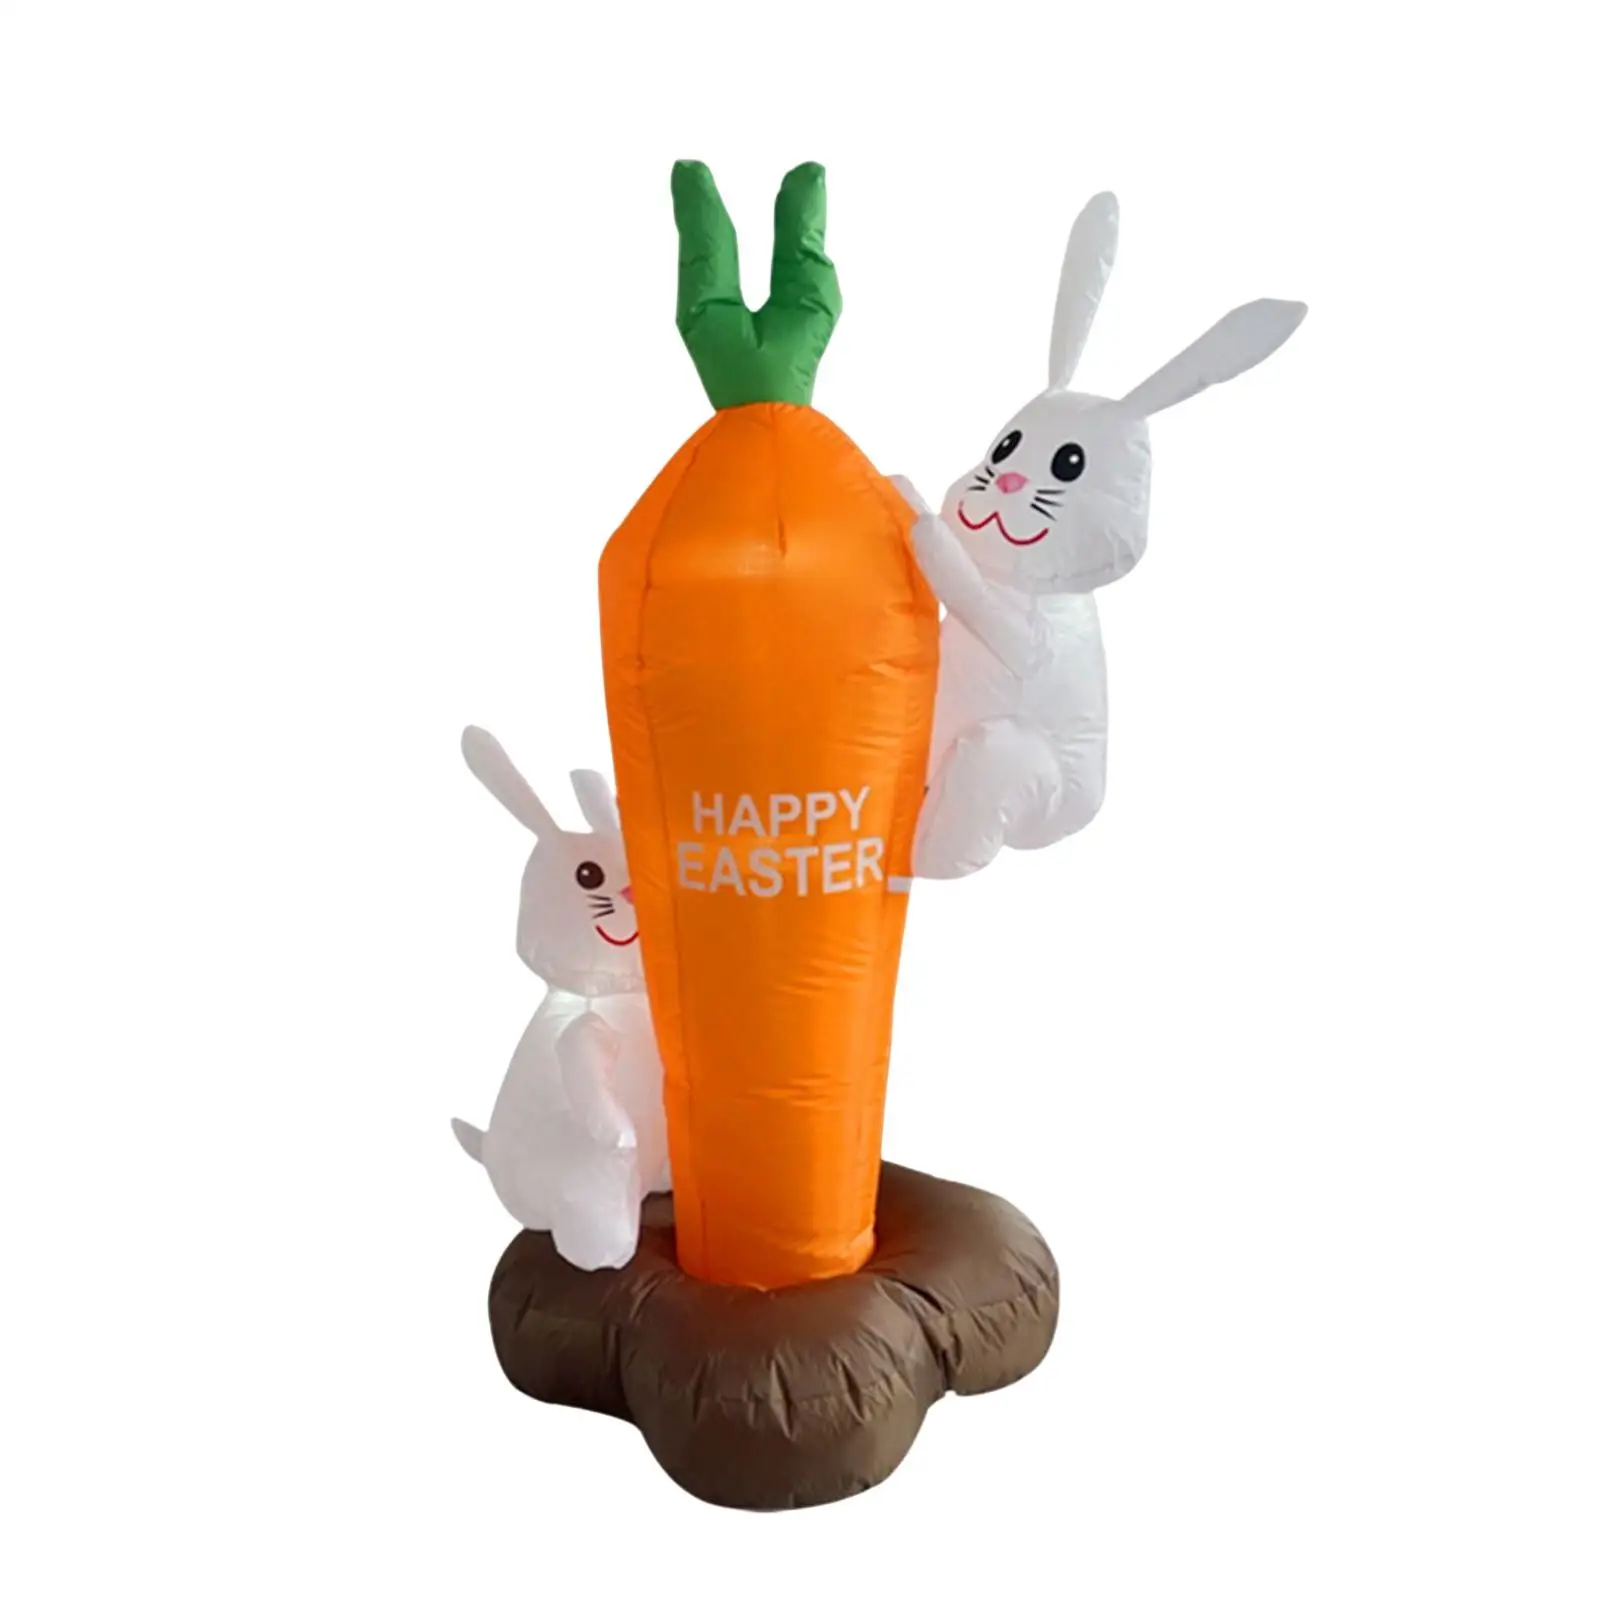 5.9ft Easter Inflatable Bunny Climbing Carrot Built in LEDs Light up Decoration for Porch Patio Lawn Indoor Outdoor Garden